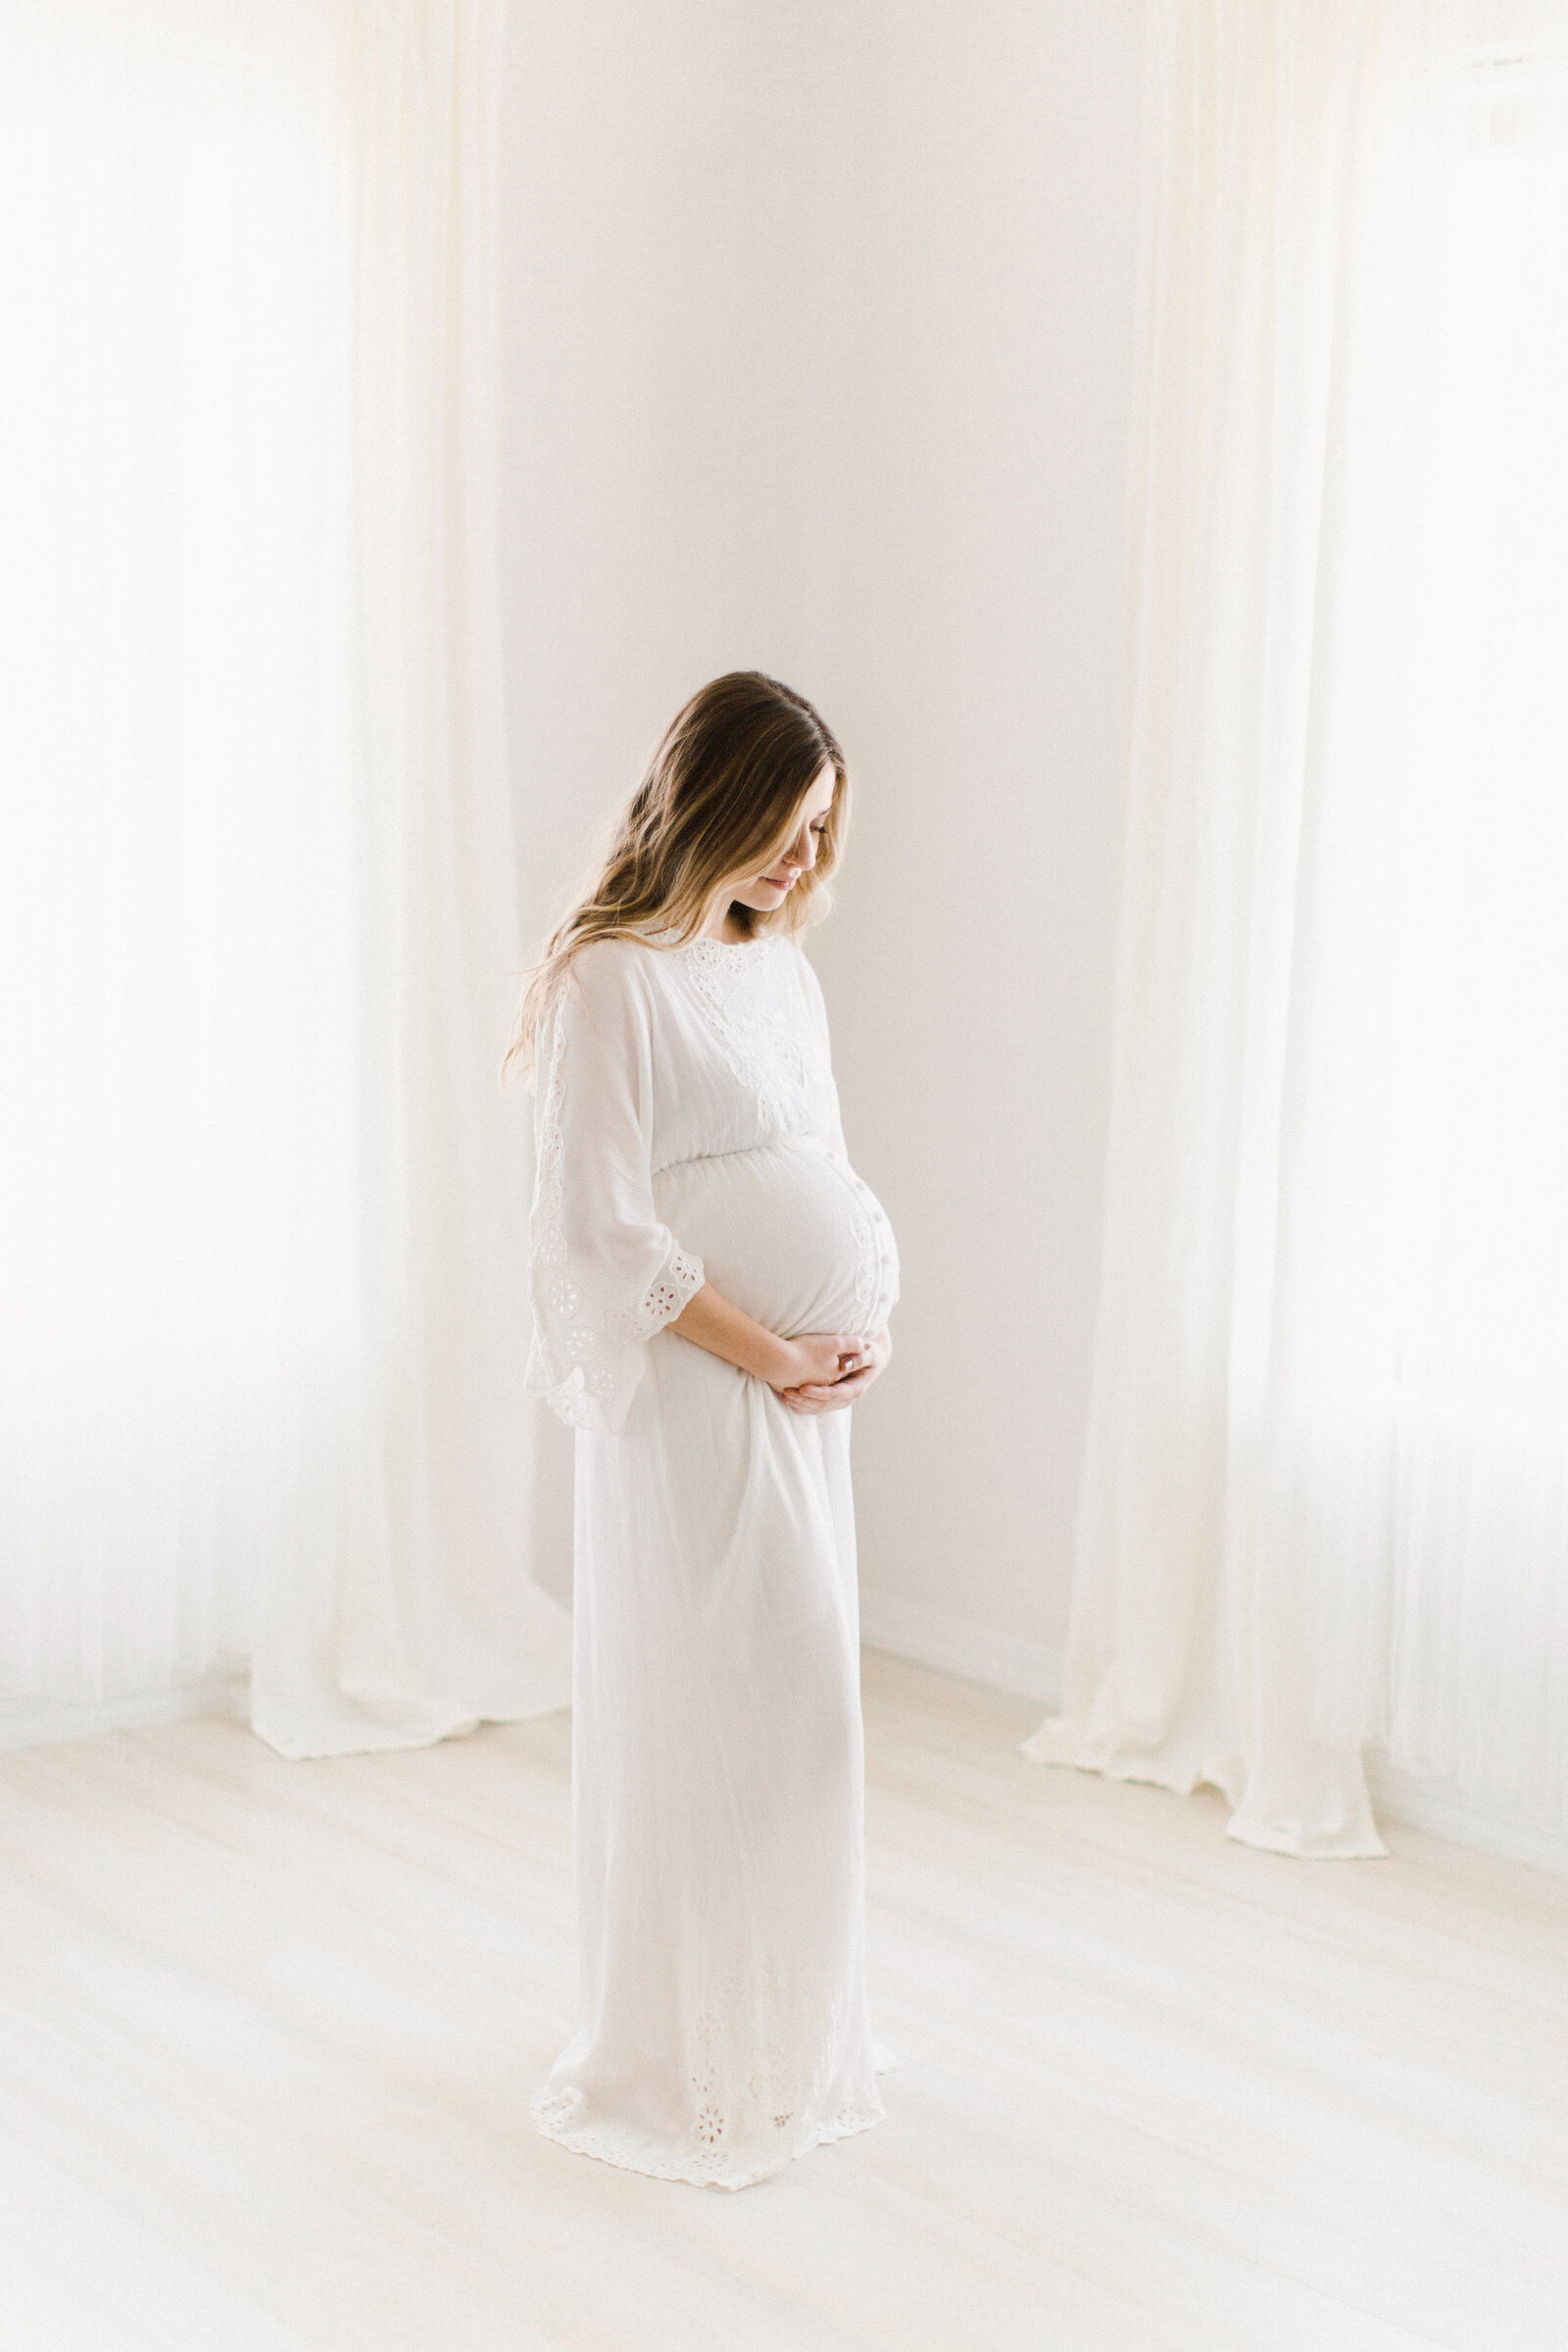 Bright and airy maternity photo shoot in luxury studio.